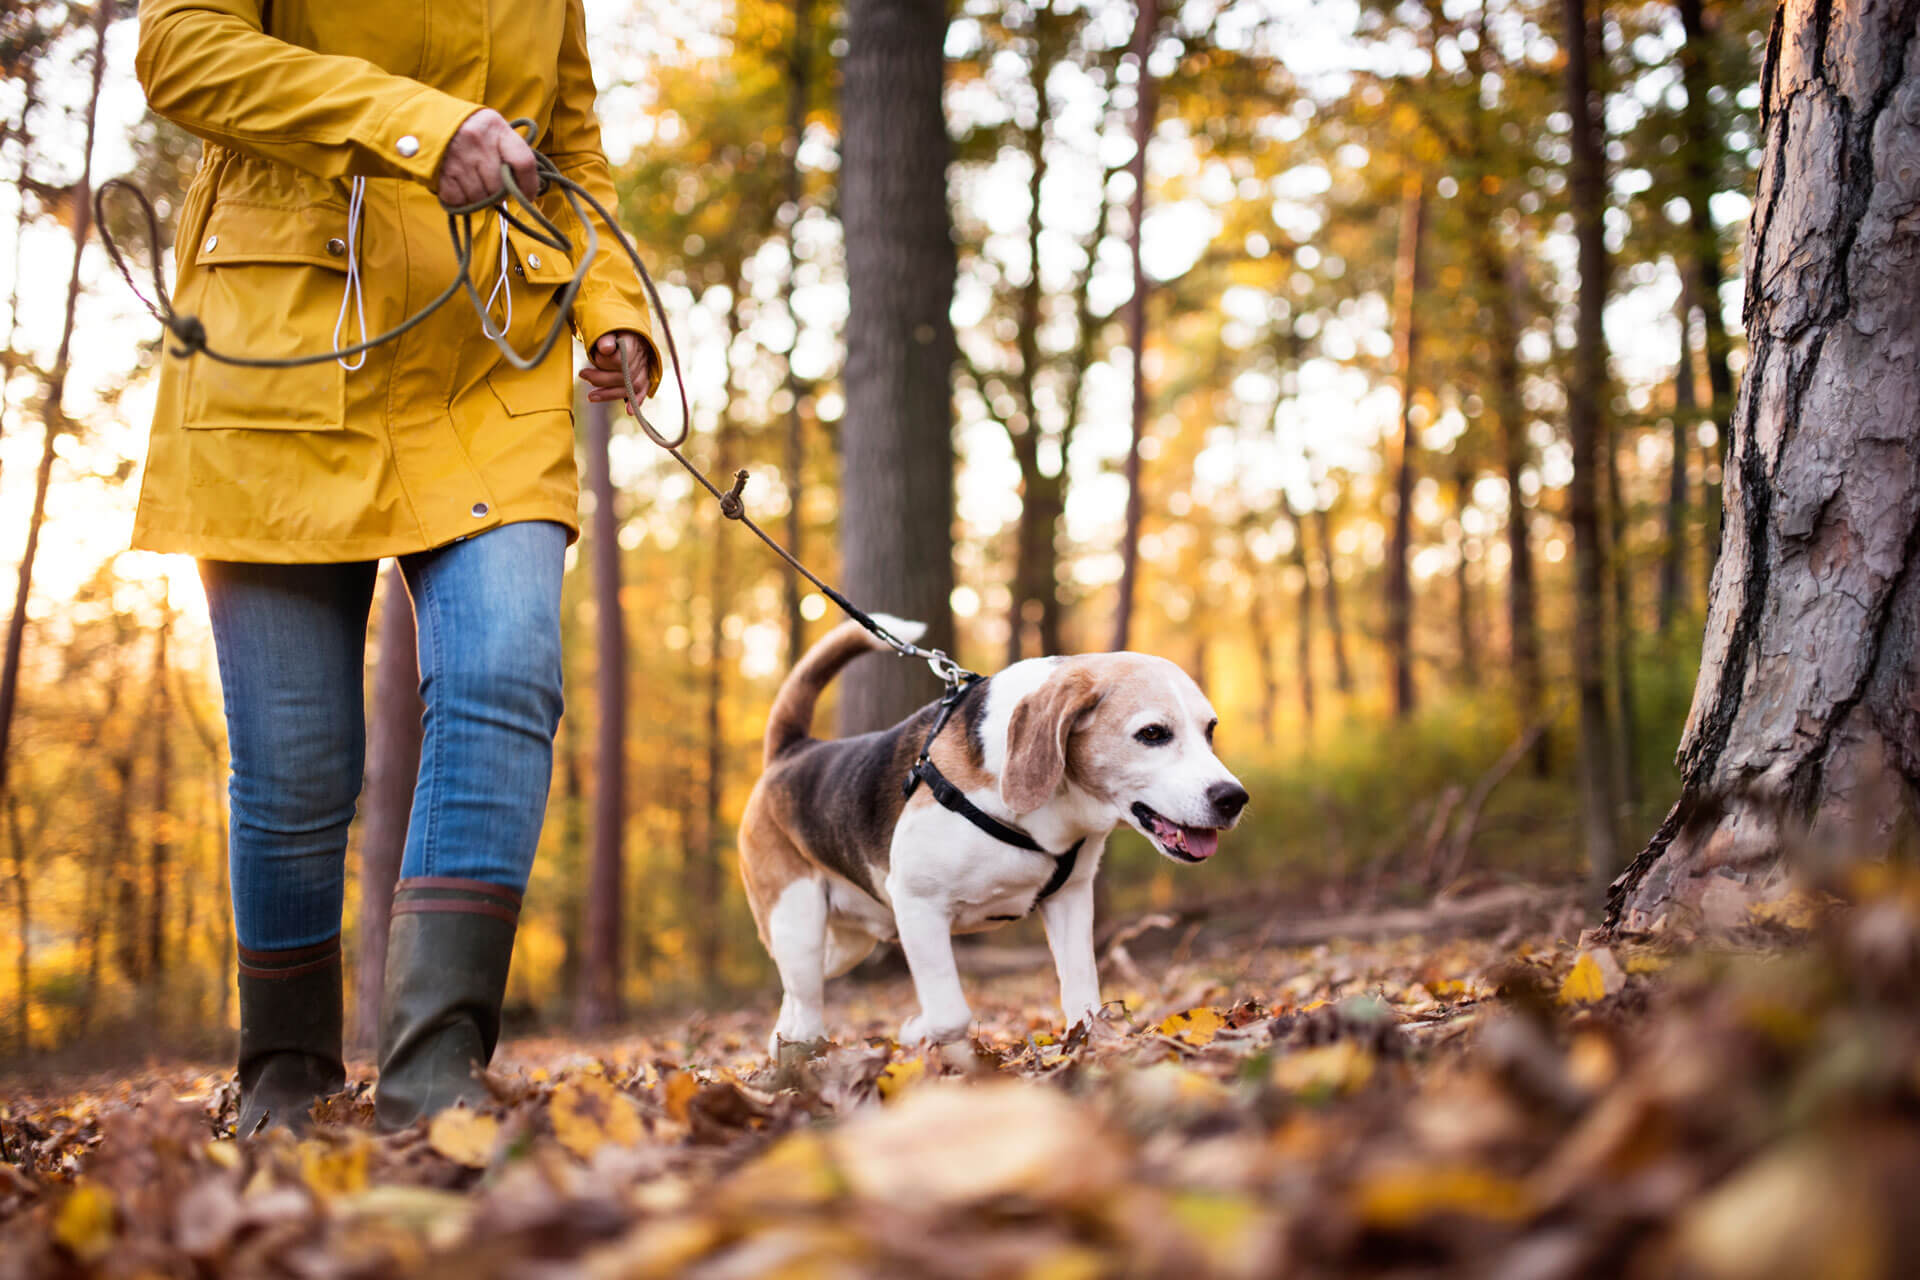 Woman in yellow coat and boots and small dog walking through forest in fall during coronavirus lockdown